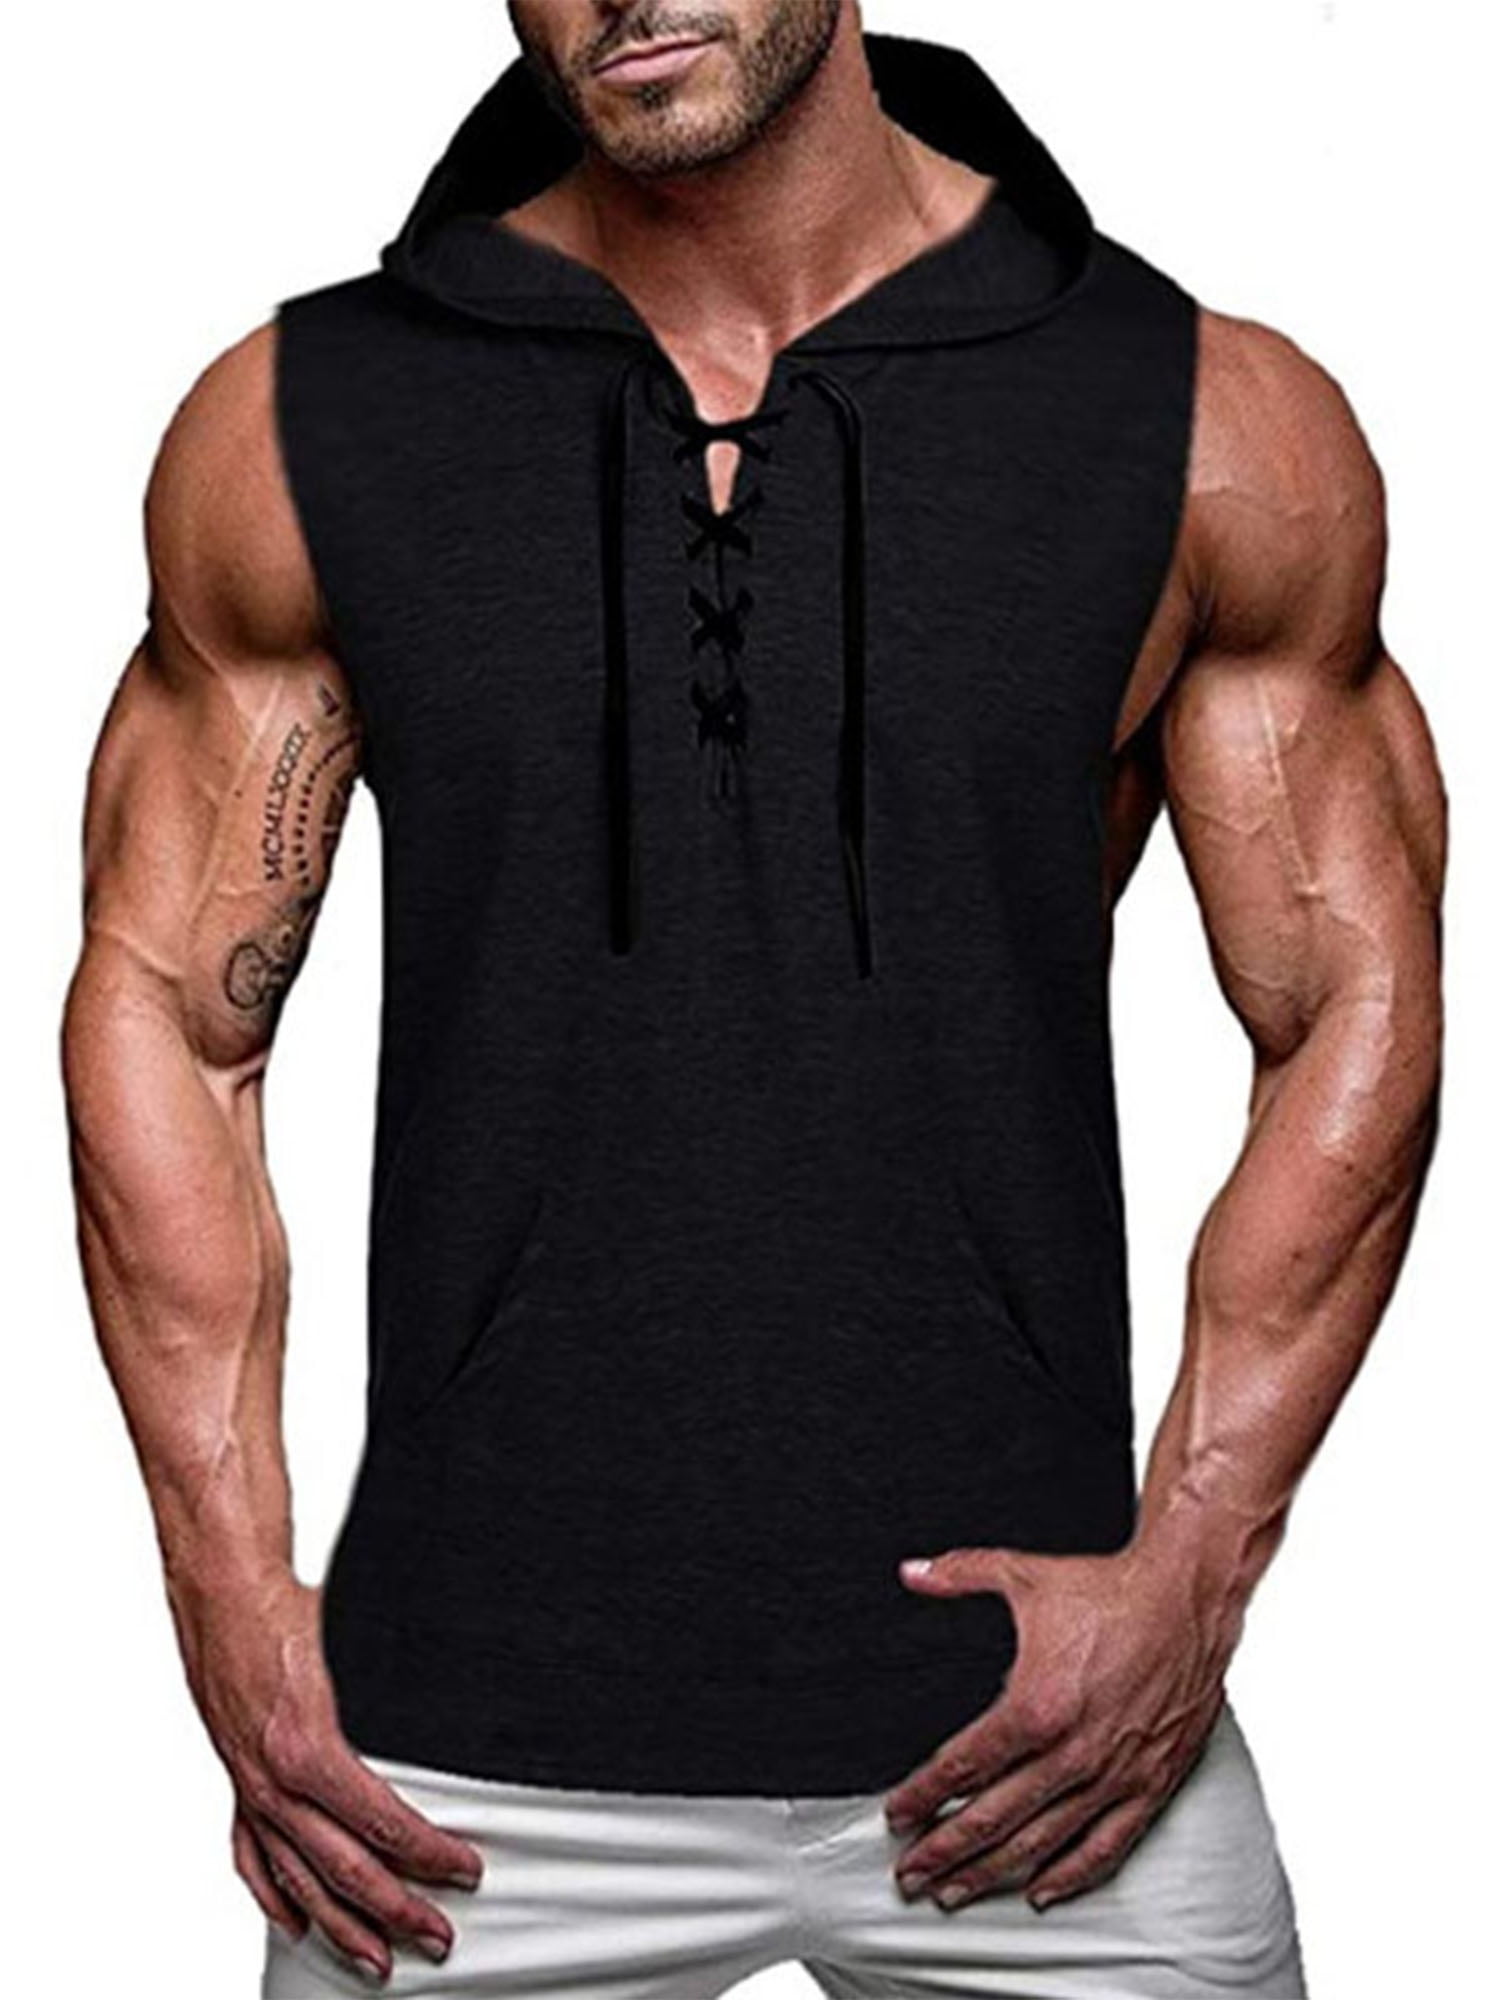 Sleeveless Tank Top Solid Fashion Muscle T-Shirt Bodybuilding Fitness Vest Men 